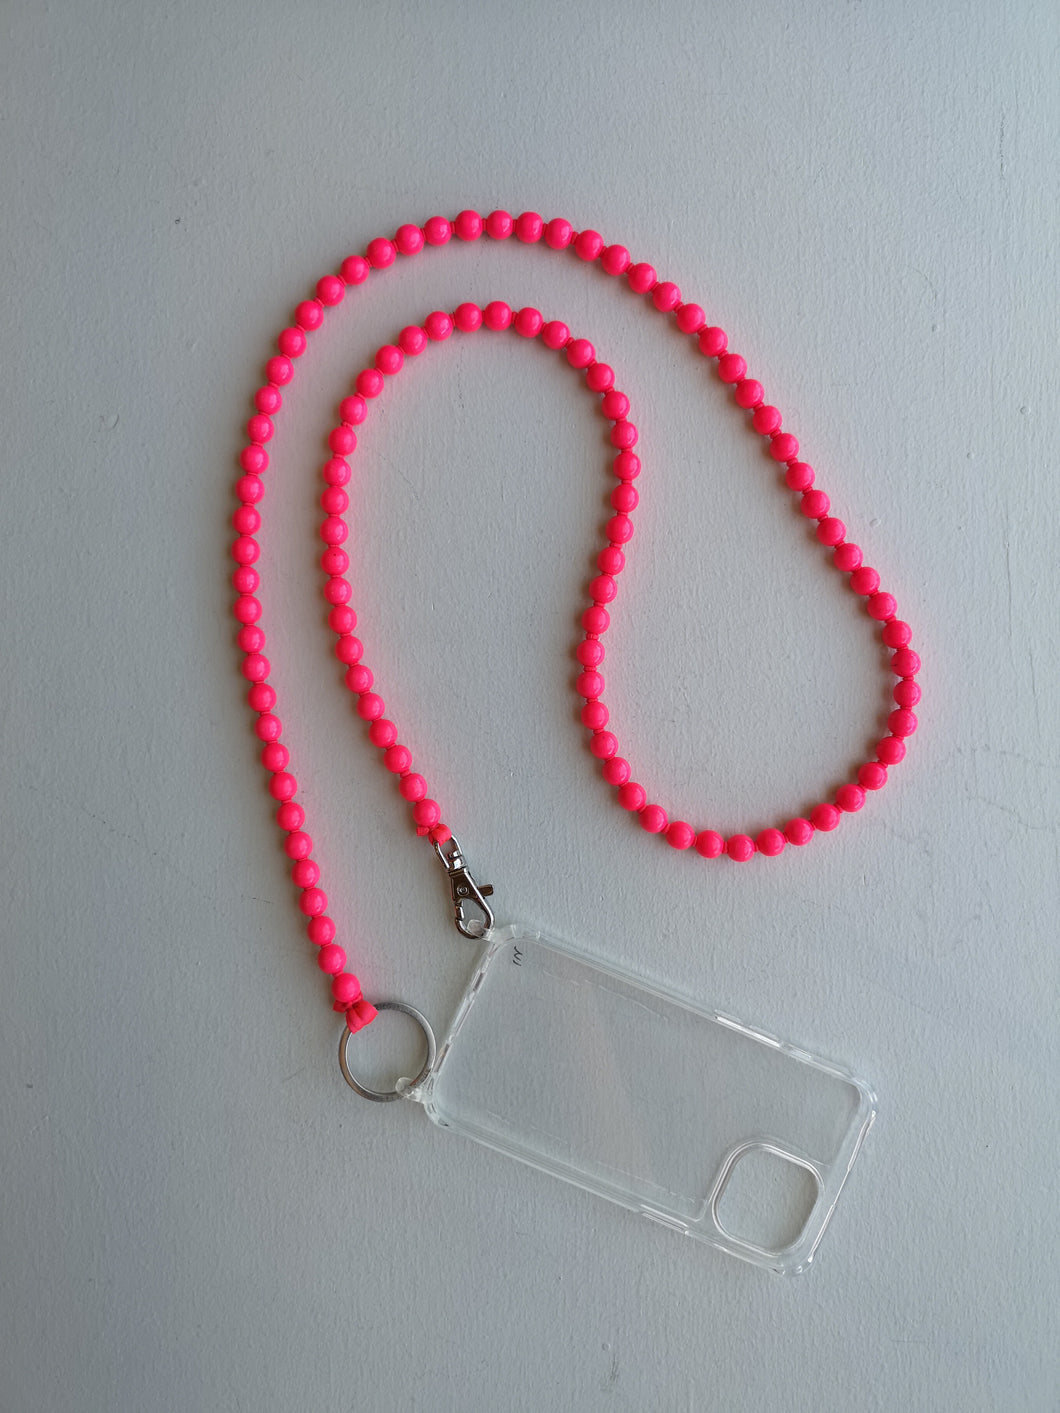 Ina Seifart Handykette Phone Necklace - Neon Pink